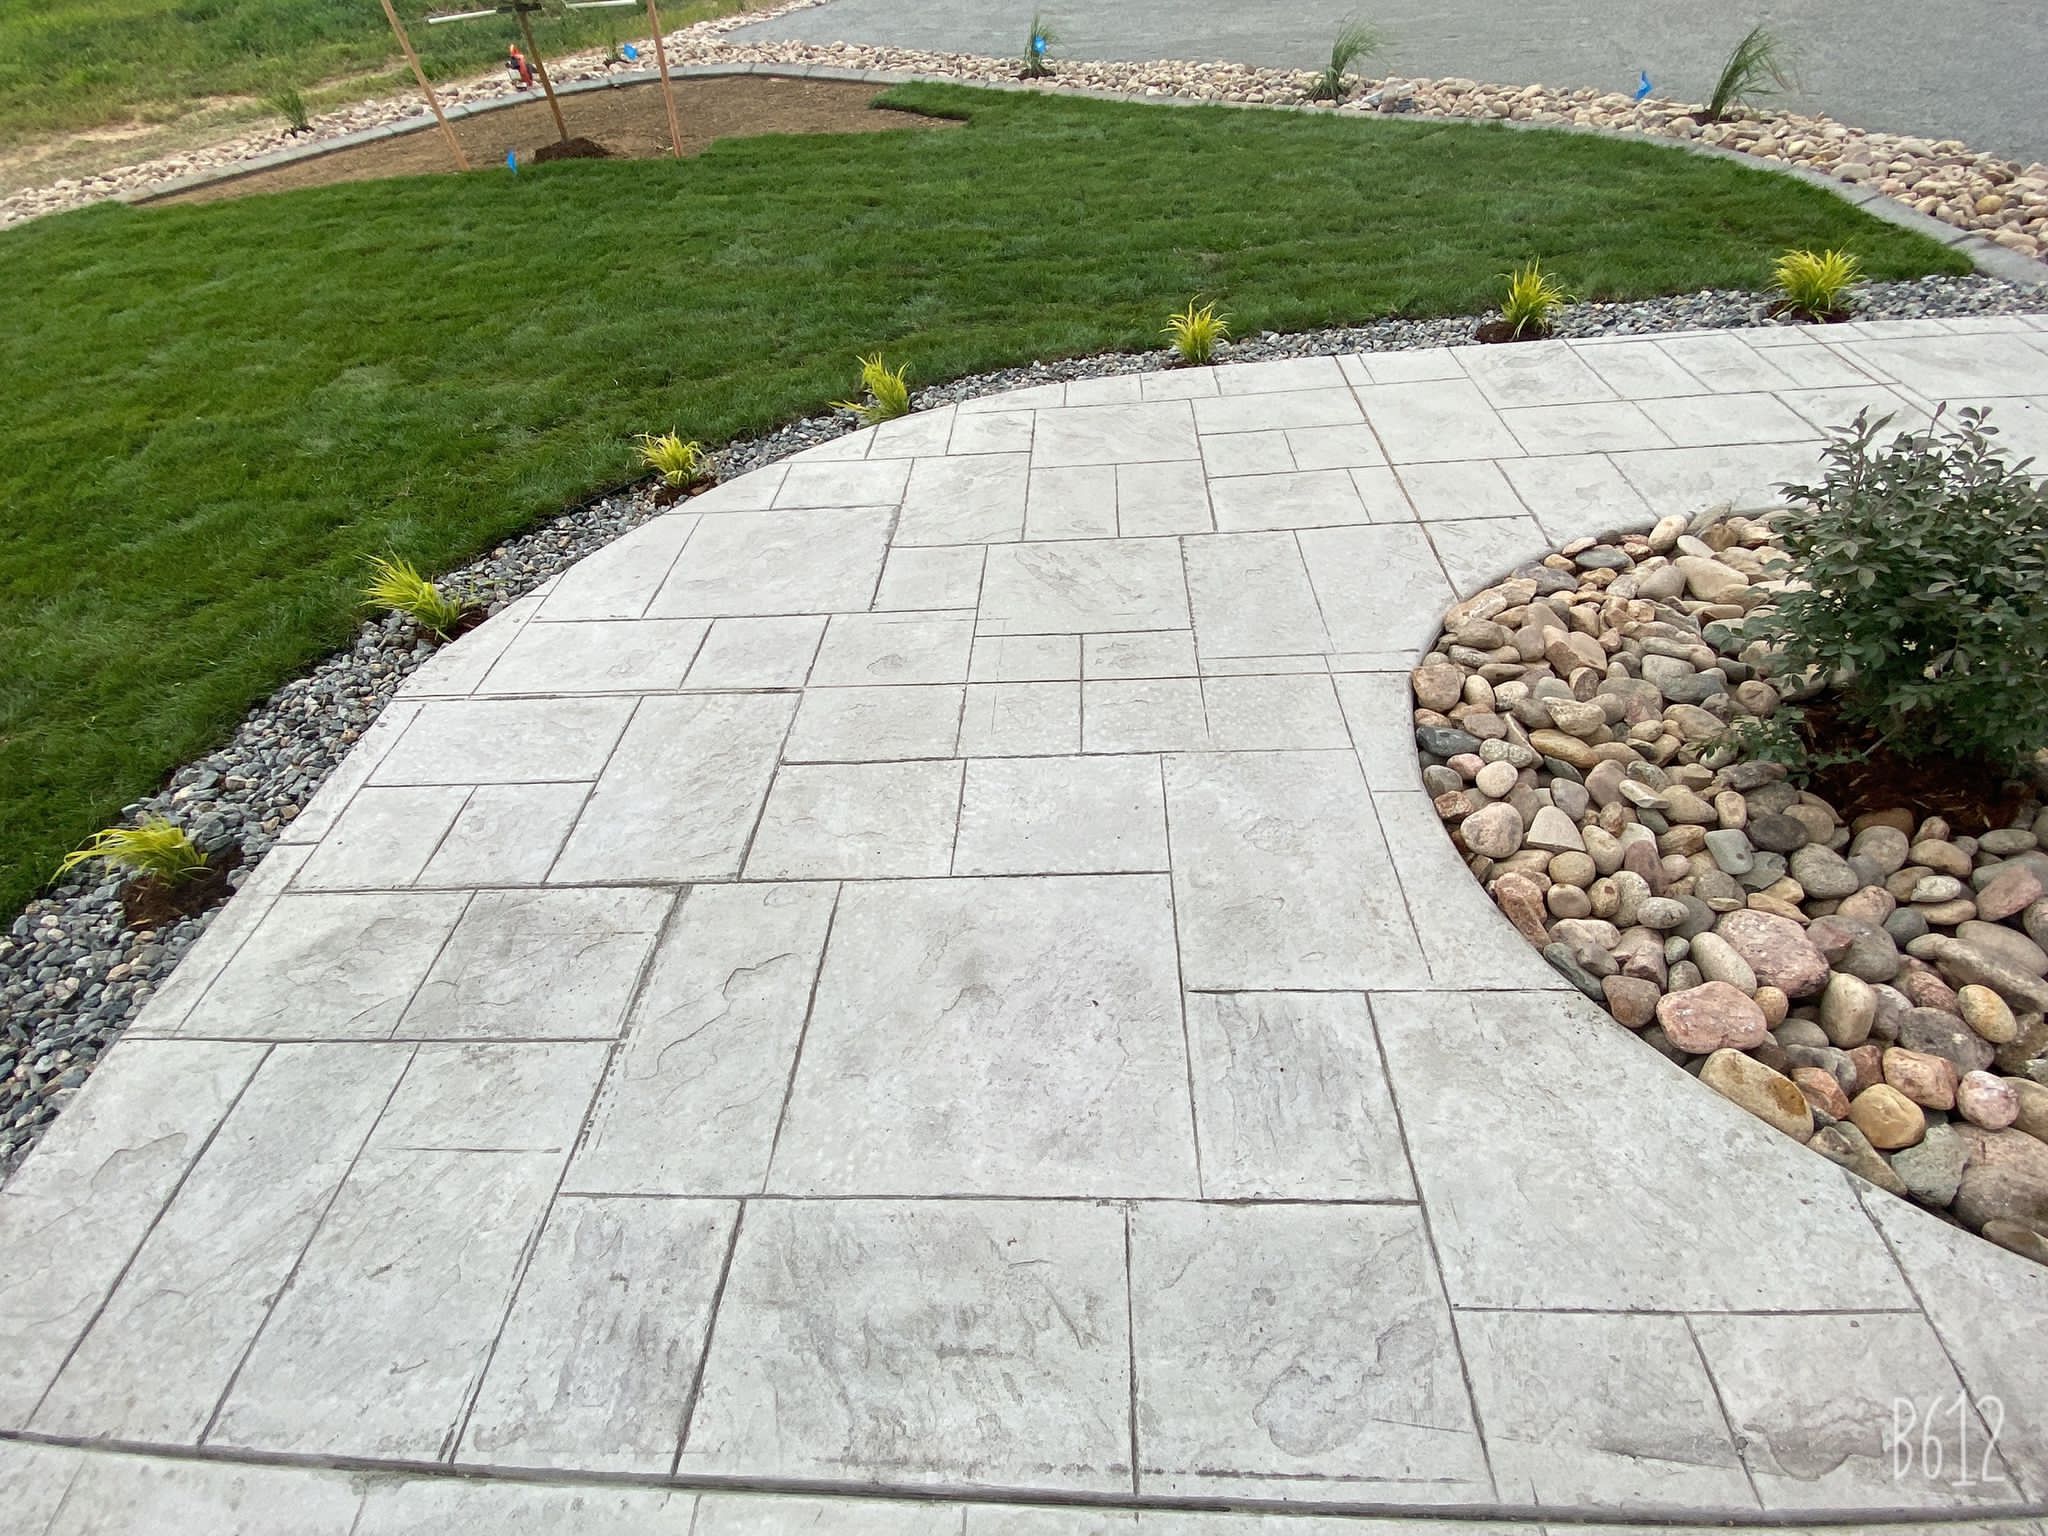 02300D0C AAF8 46FD 8849 1601DC05203A, Benefits of Stamped Concrete Patio,